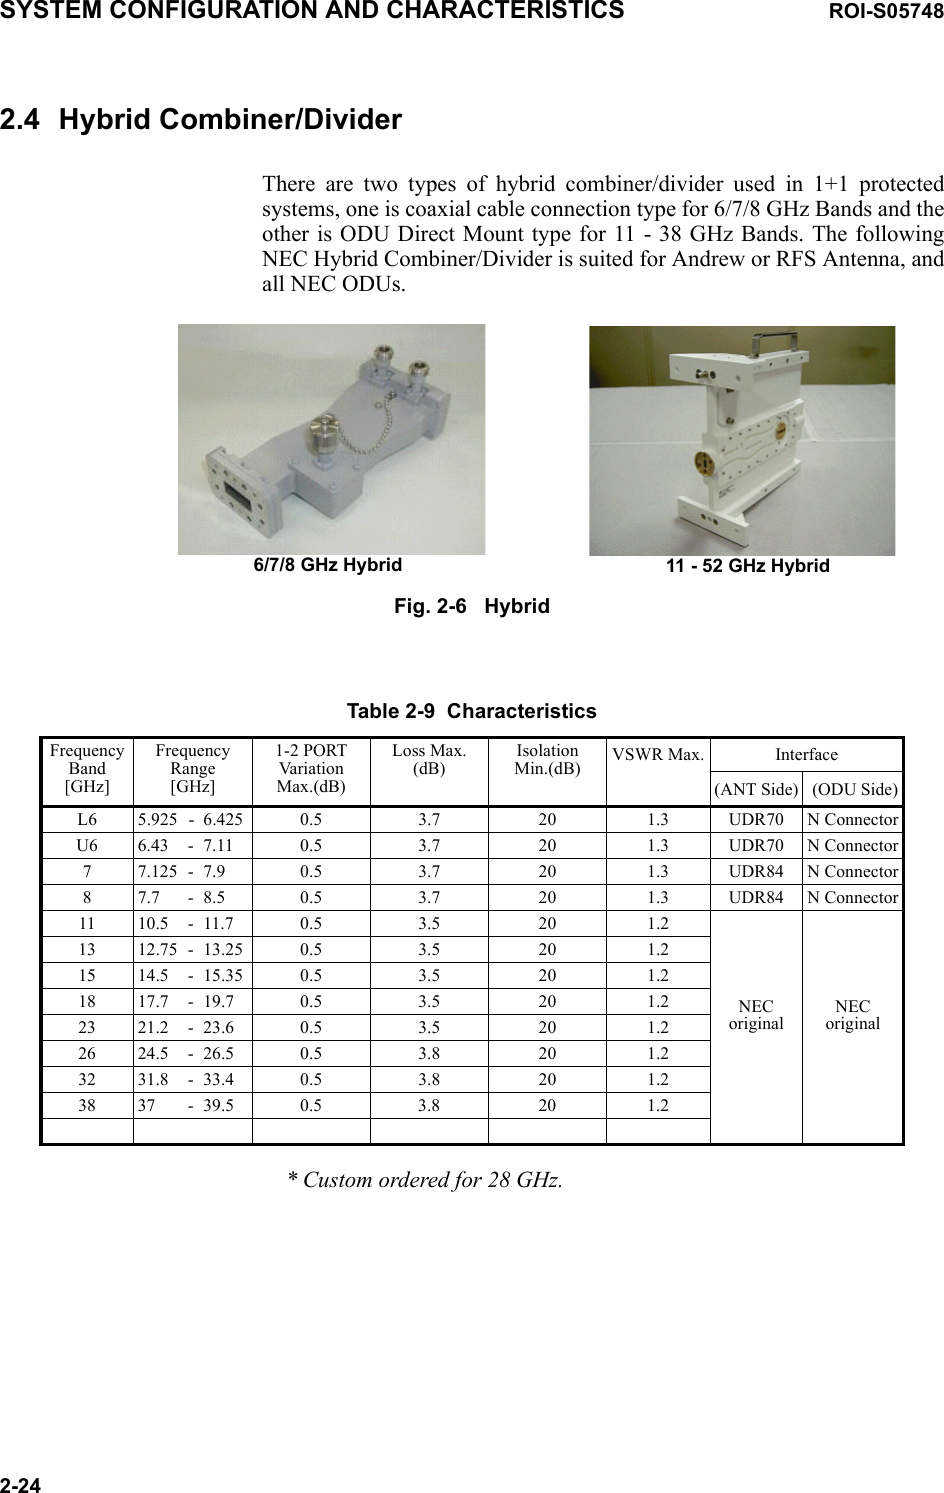 SYSTEM CONFIGURATION AND CHARACTERISTICS ROI-S057482-242.4 Hybrid Combiner/DividerThere are two types of hybrid combiner/divider used in 1+1 protected systems, one is coaxial cable connection type for 6/7/8 GHz Bands and the other is ODU Direct Mount type for 11 - 38 GHz Bands. The following NEC Hybrid Combiner/Divider is suited for Andrew or RFS Antenna, and all NEC ODUs. 6/7/8 GHz Hybrid 11 - 52 GHz HybridFig. 2-6   HybridTable 2-9  CharacteristicsFrequencyBand[GHz]FrequencyRange[GHz]1-2 PORTVar ia ti o nMax.(dB)Loss Max. (dB)Isolation Min.(dB) VSWR Max. Interface (ANT Side)  (ODU Side)L6 5.925 -6.425 0.5 3.7 20 1.3 UDR70 N ConnectorU6 6.43 -7.11 0.5 3.7 20 1.3 UDR70 N Connector77.125 -7.9 0.5 3.7 20 1.3 UDR84 N Connector87.7 -8.5 0.5 3.7 20 1.3 UDR84 N Connector11 10.5 -11.7 0.5 3.5 20 1.2NEC originalNEC original13 12.75 -13.25 0.5 3.5 20 1.215 14.5 -15.35 0.5 3.5 20 1.218 17.7 -19.7 0.5 3.5 20 1.223 21.2 -23.6 0.5 3.5 20 1.226 24.5 -26.5 0.5 3.8 20 1.232 31.8 -33.4 0.5 3.8 20 1.238 37 -39.5 0.5 3.8 20 1.2* Custom ordered for 28 GHz.